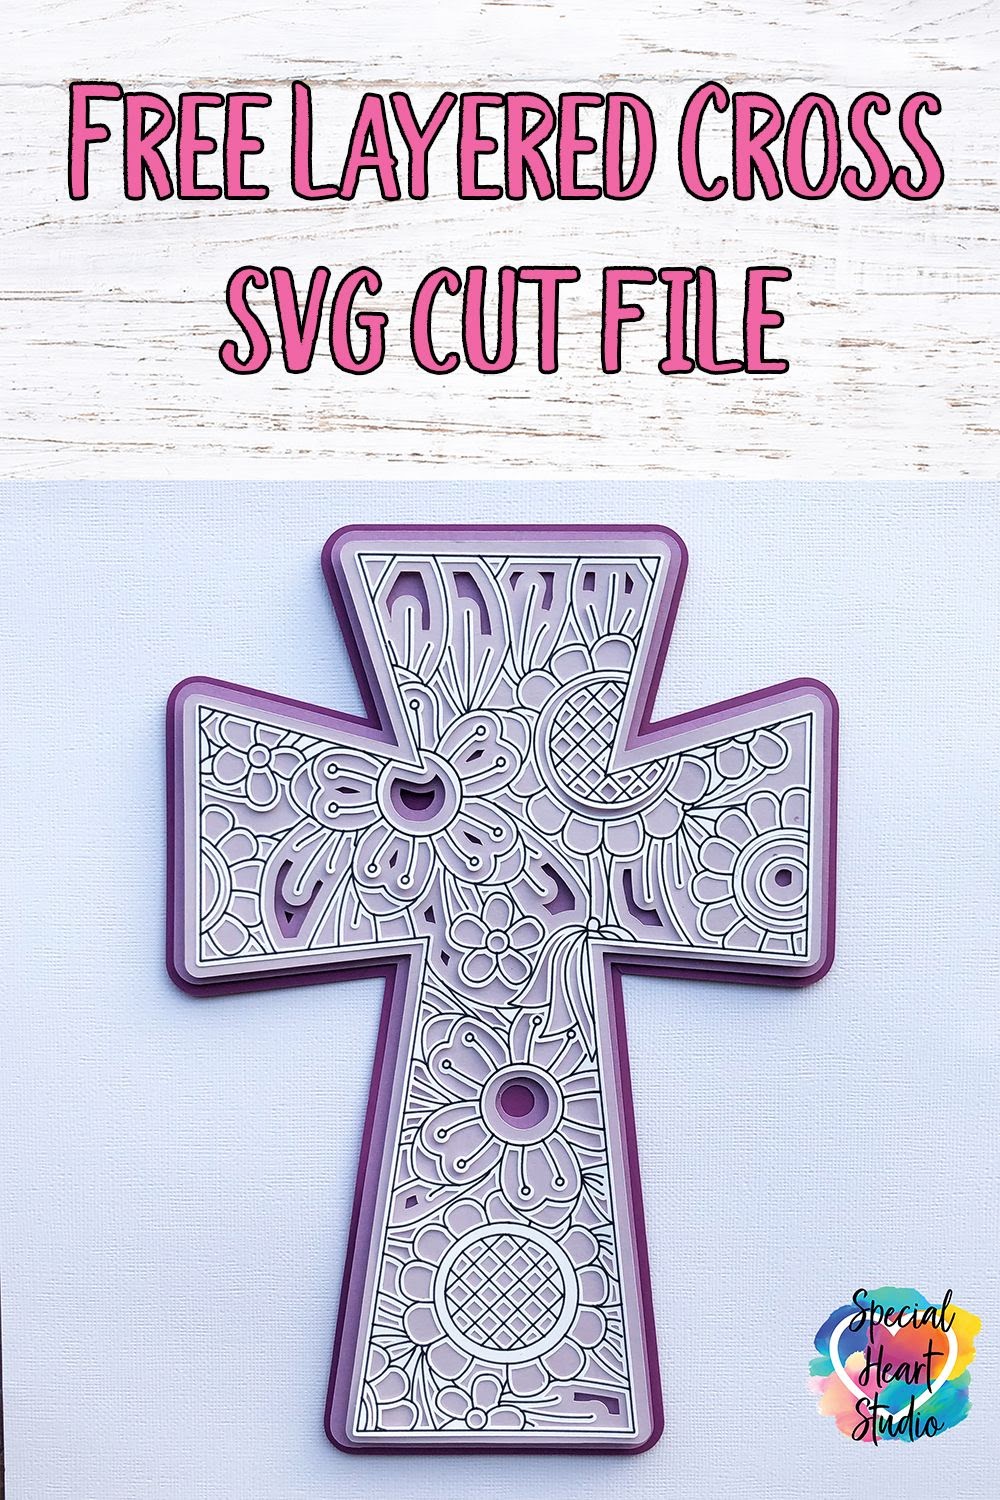 Download 3D Multi Layered Cross Svg For Cricut - Free Layered SVG Files